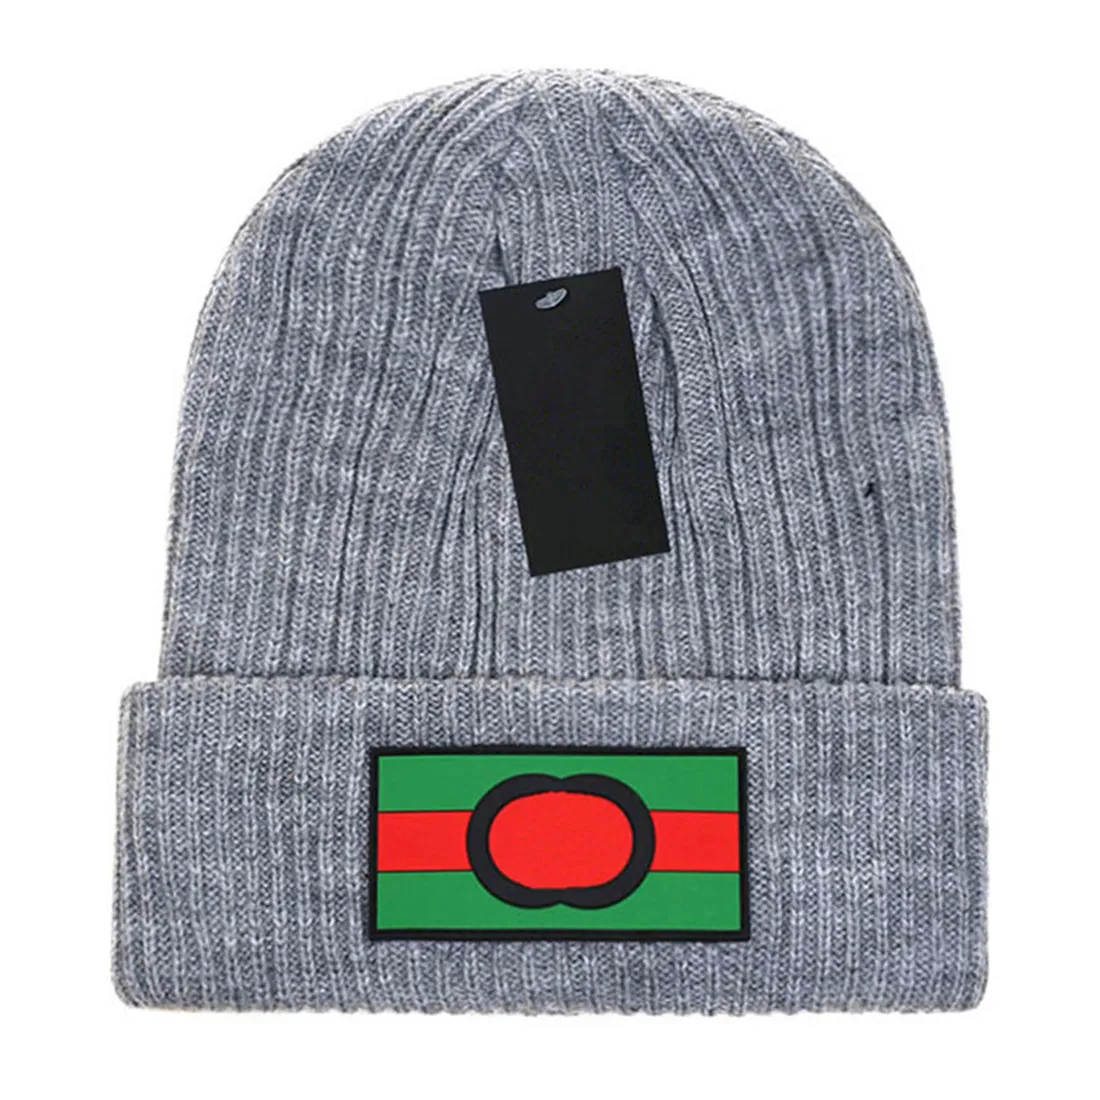 Fashion designer men winter beanie high-quality unisex knitted cotton warm hat classical sports skull caps ladies casual outdoor stripe cap beanies 8 colors A-7